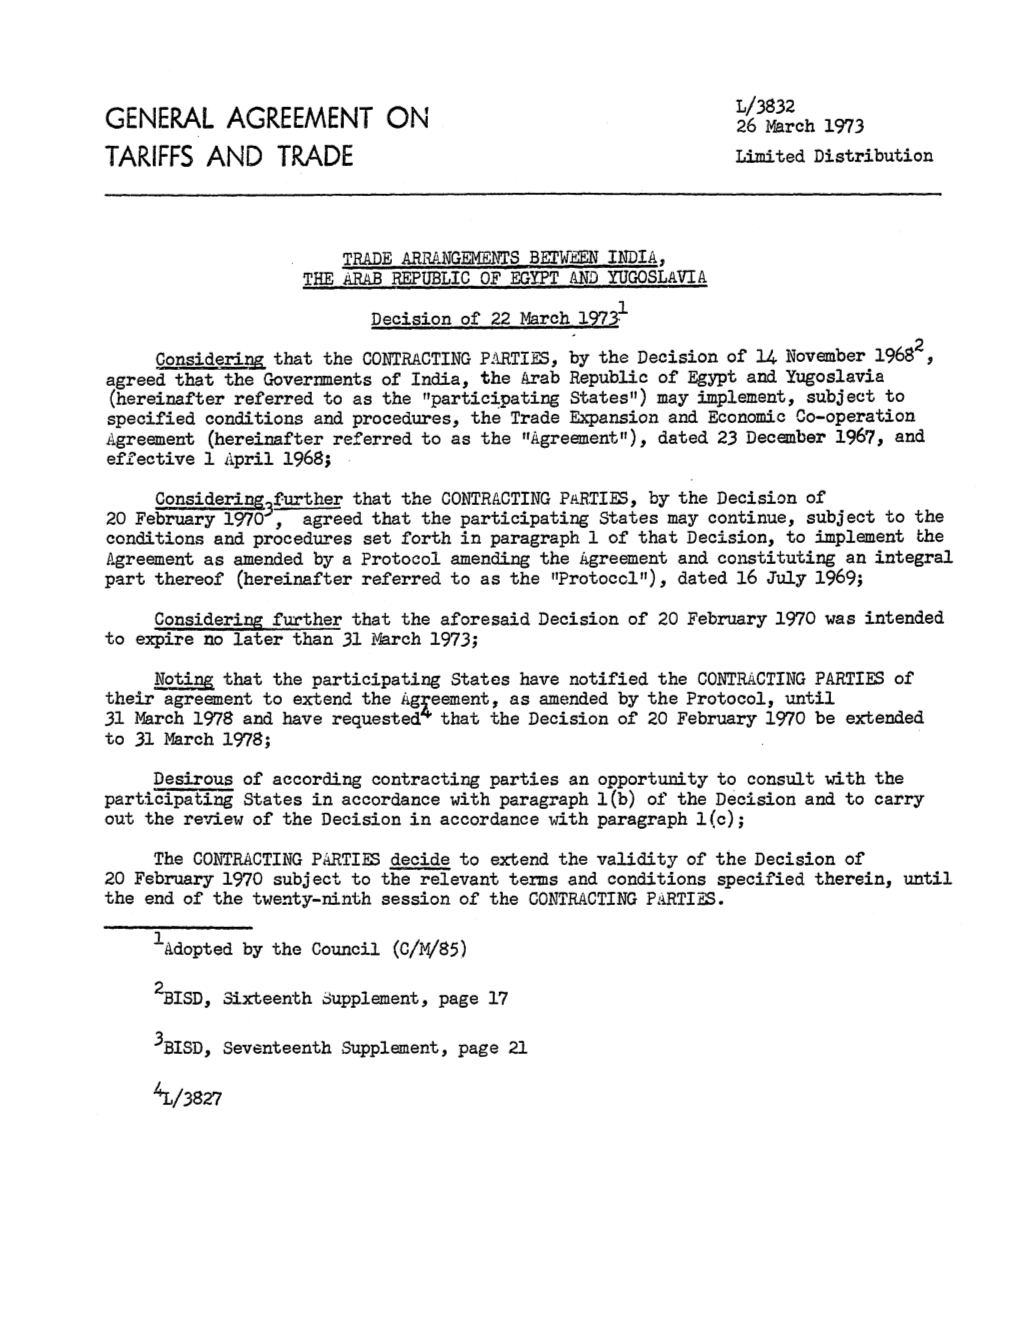 26/March 1973 TARIFFS and TRADE Limited Distribution